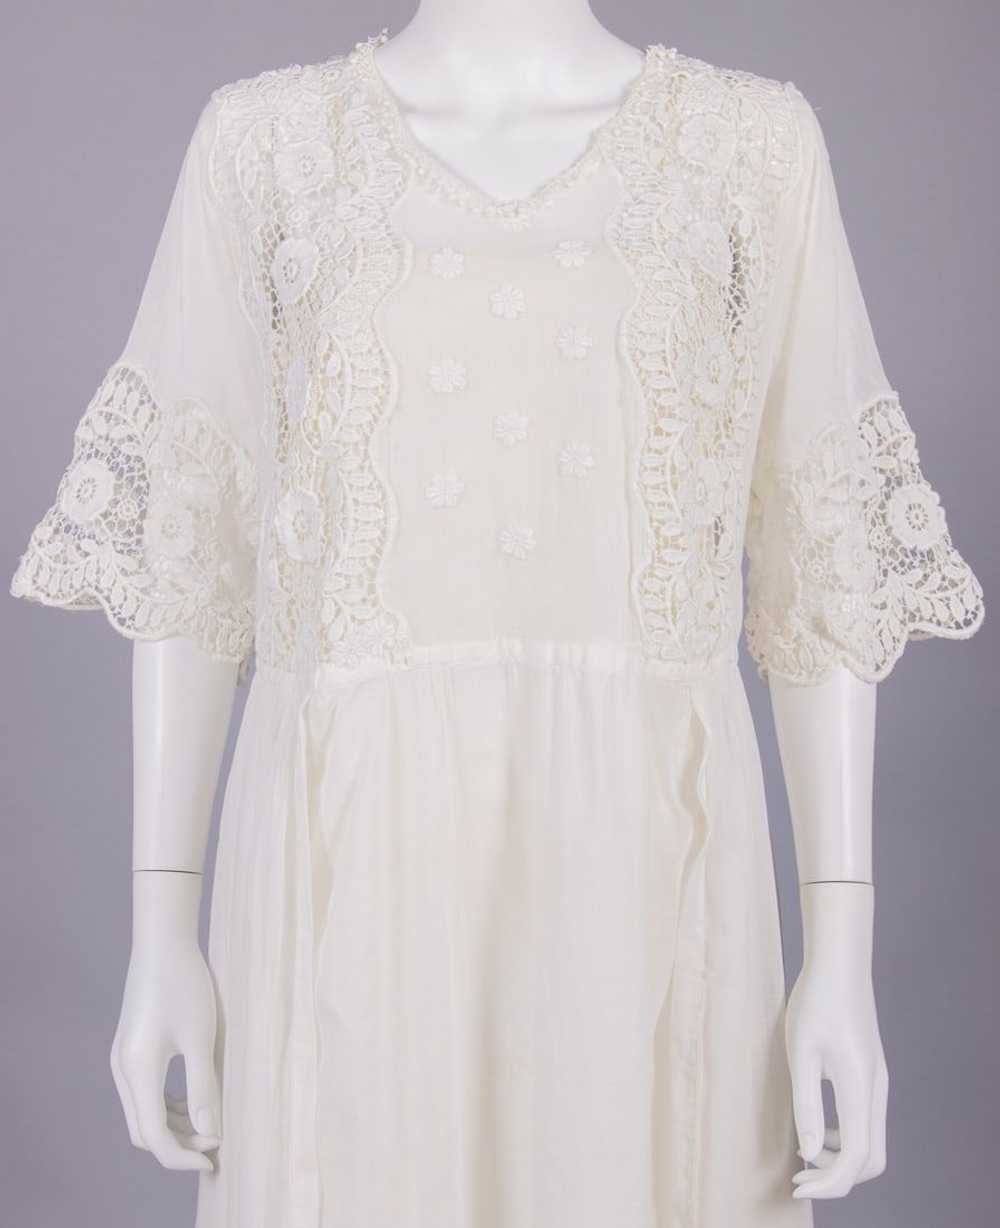 THREE COTTON TEA OR DAY DRESSES, EARLY-MID 1920s - image 9